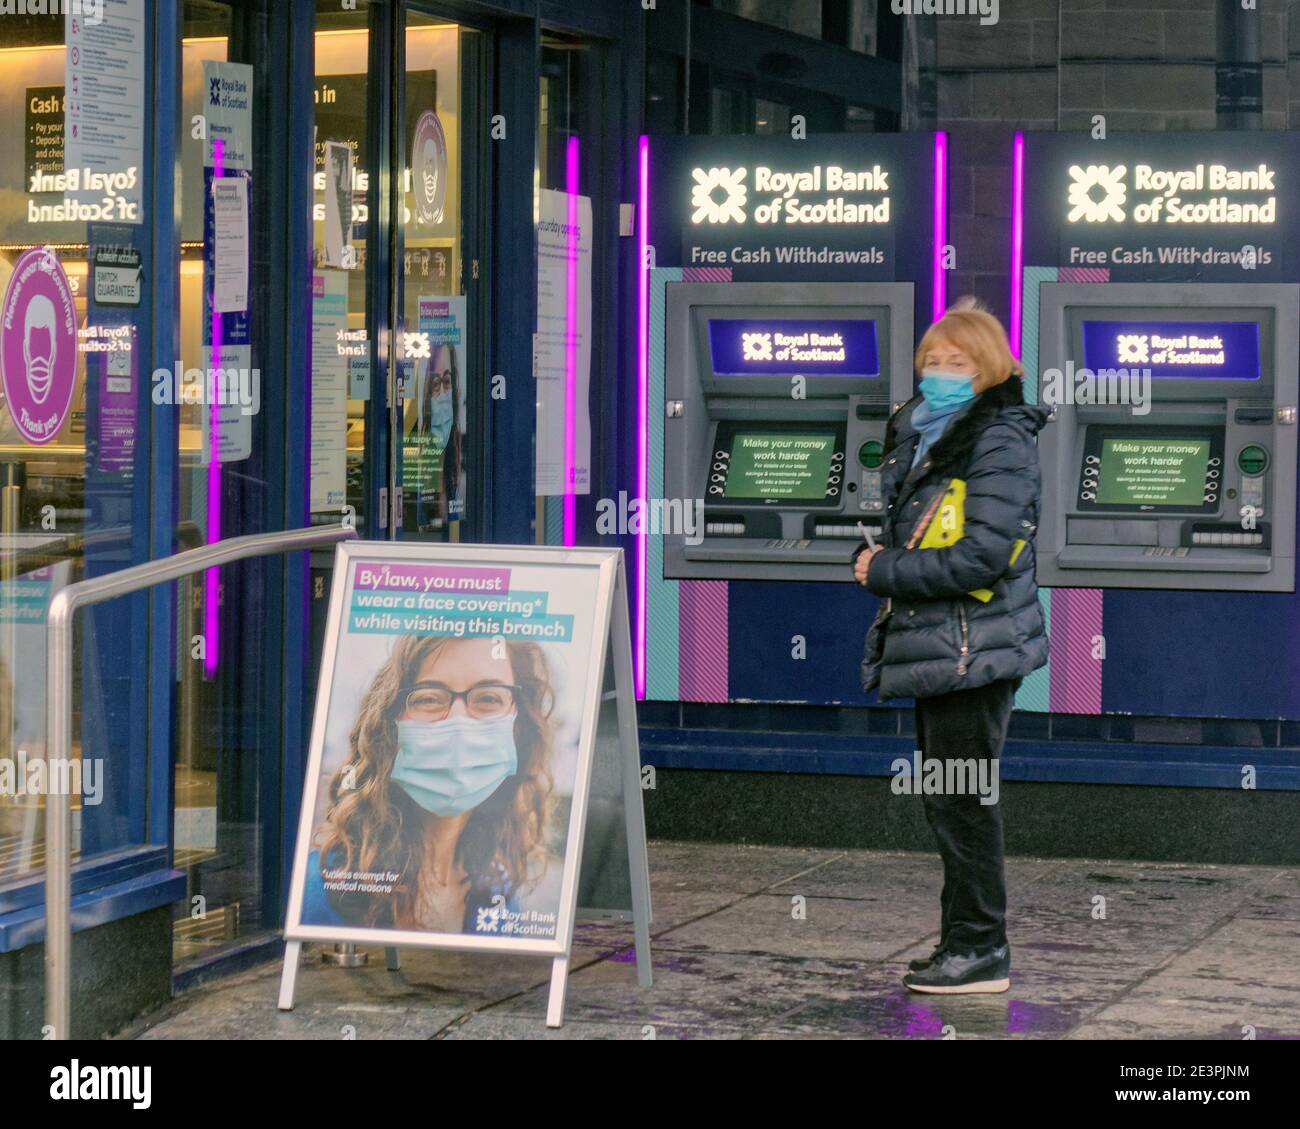 Glasgow, Scotland, UK. 20th January, 2021.Lockdown Wednesday was wet and  saw coffee bought by app  with  people walking around lost with the new take-away rules nothing to do. Royal bank has strict rules as customers wait to be leyt in. Credit Gerard Ferry/Alamy Live News Stock Photo